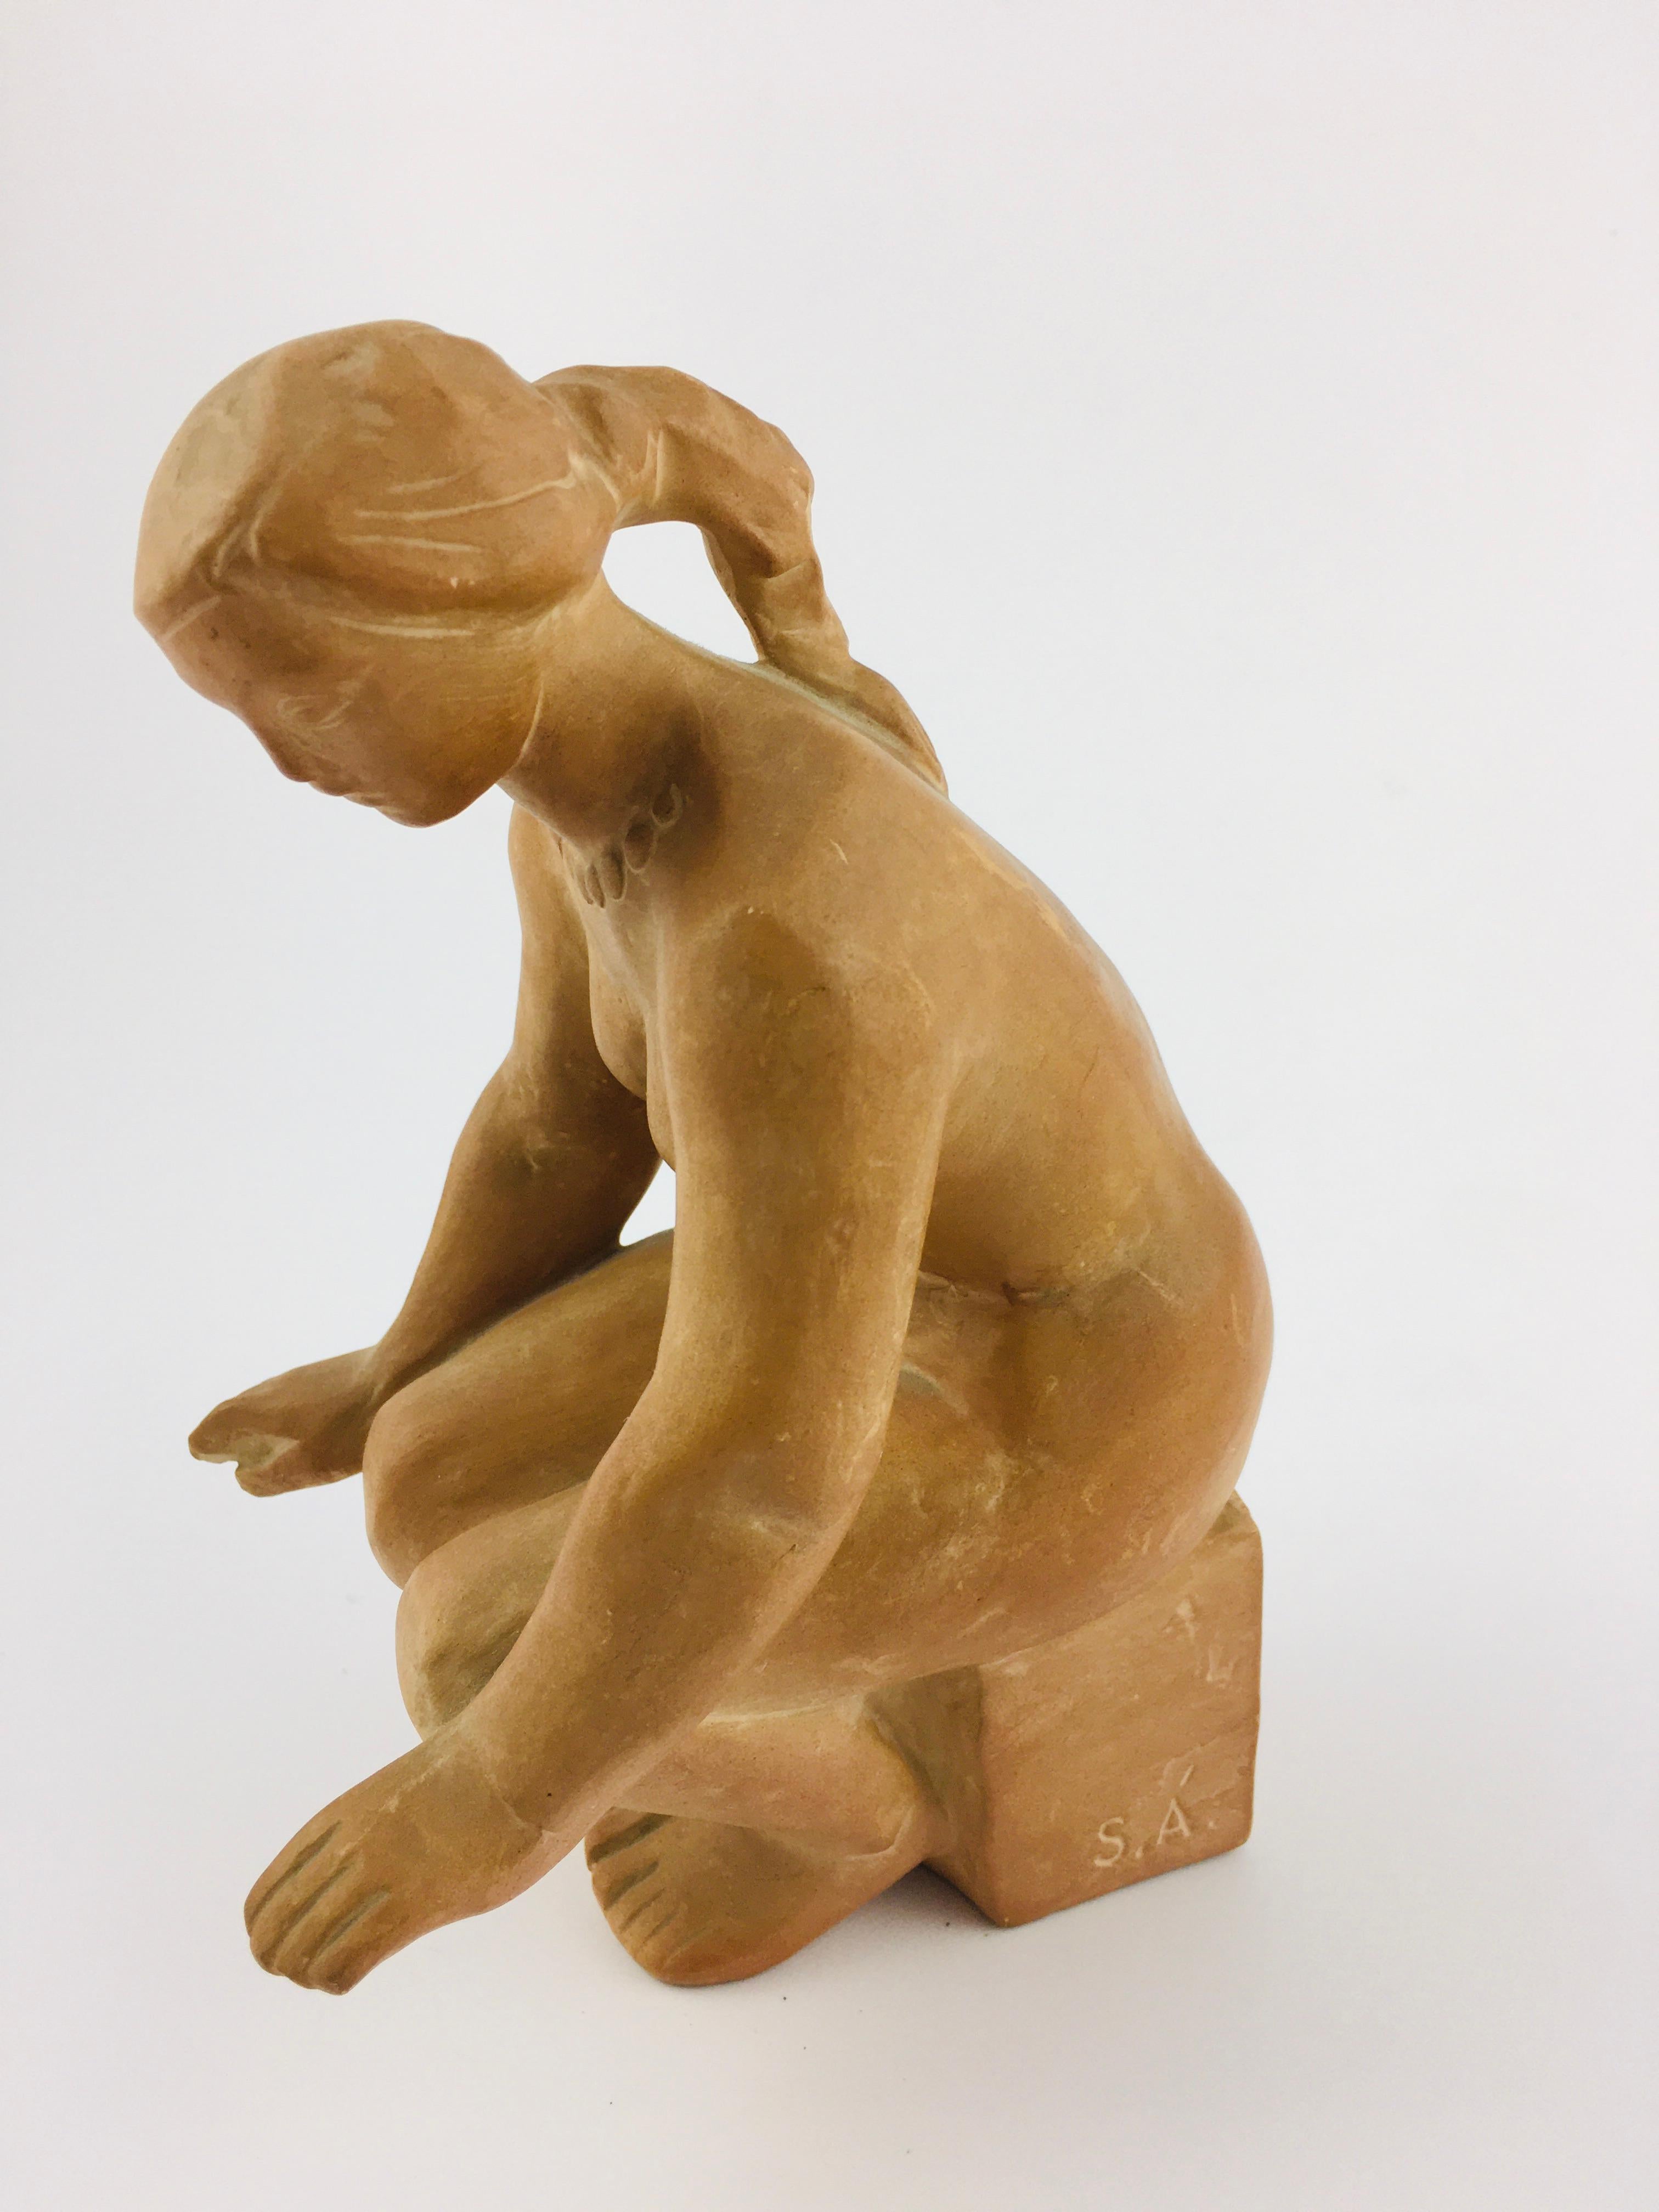 Small sized female nude sculpture of Árpád Somogyi from the 1970s. Vintage terracotta statue of a woman sitting on a bench with S.Á mark on the side. Handmade, unique piece. Retro female ceramic statue. In perfect condition.
